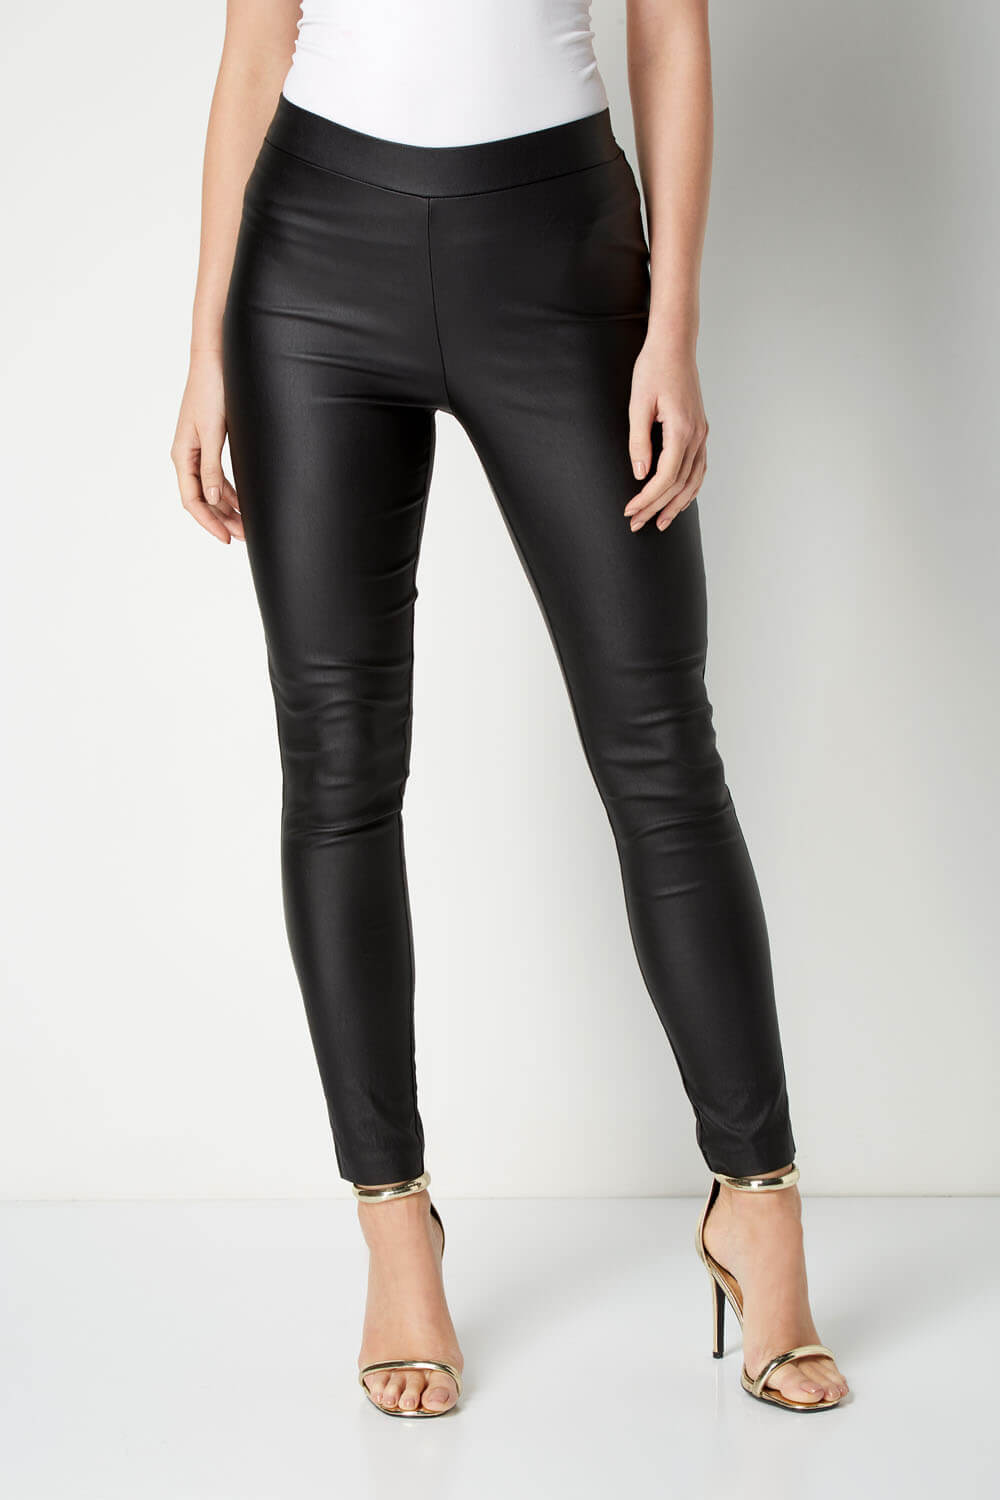 Faux Leather Pull On Stretch Trousers in Black  Roman Originals UK